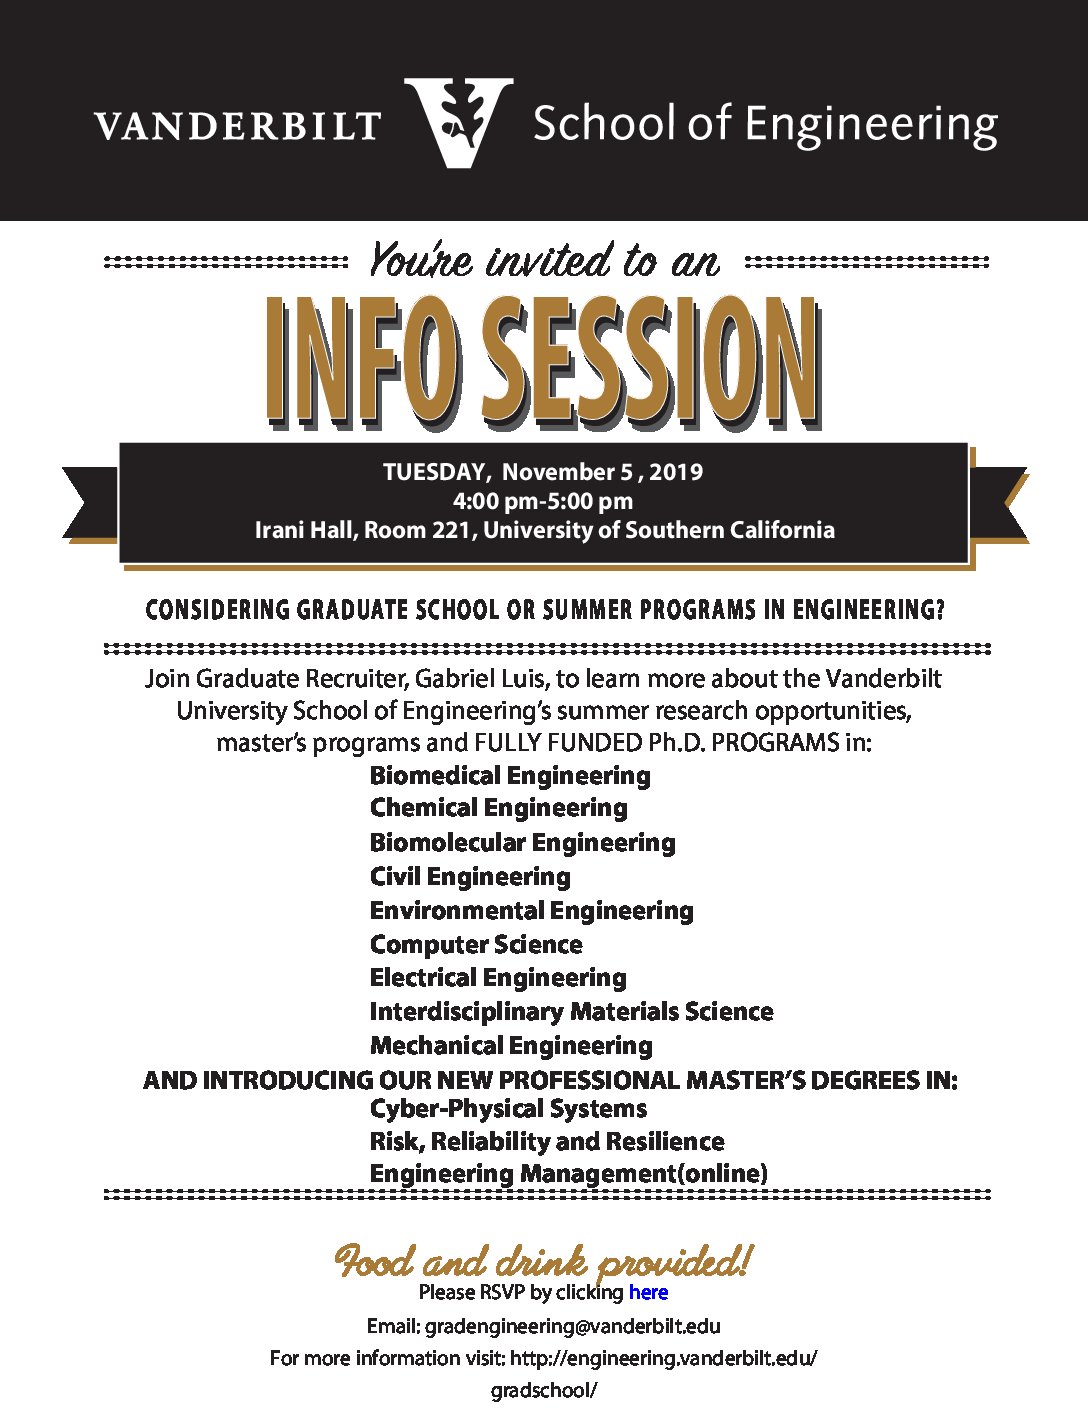 Featured image for “Info Session for research and graduate programs at Vanderbilt’s School of Engineering”